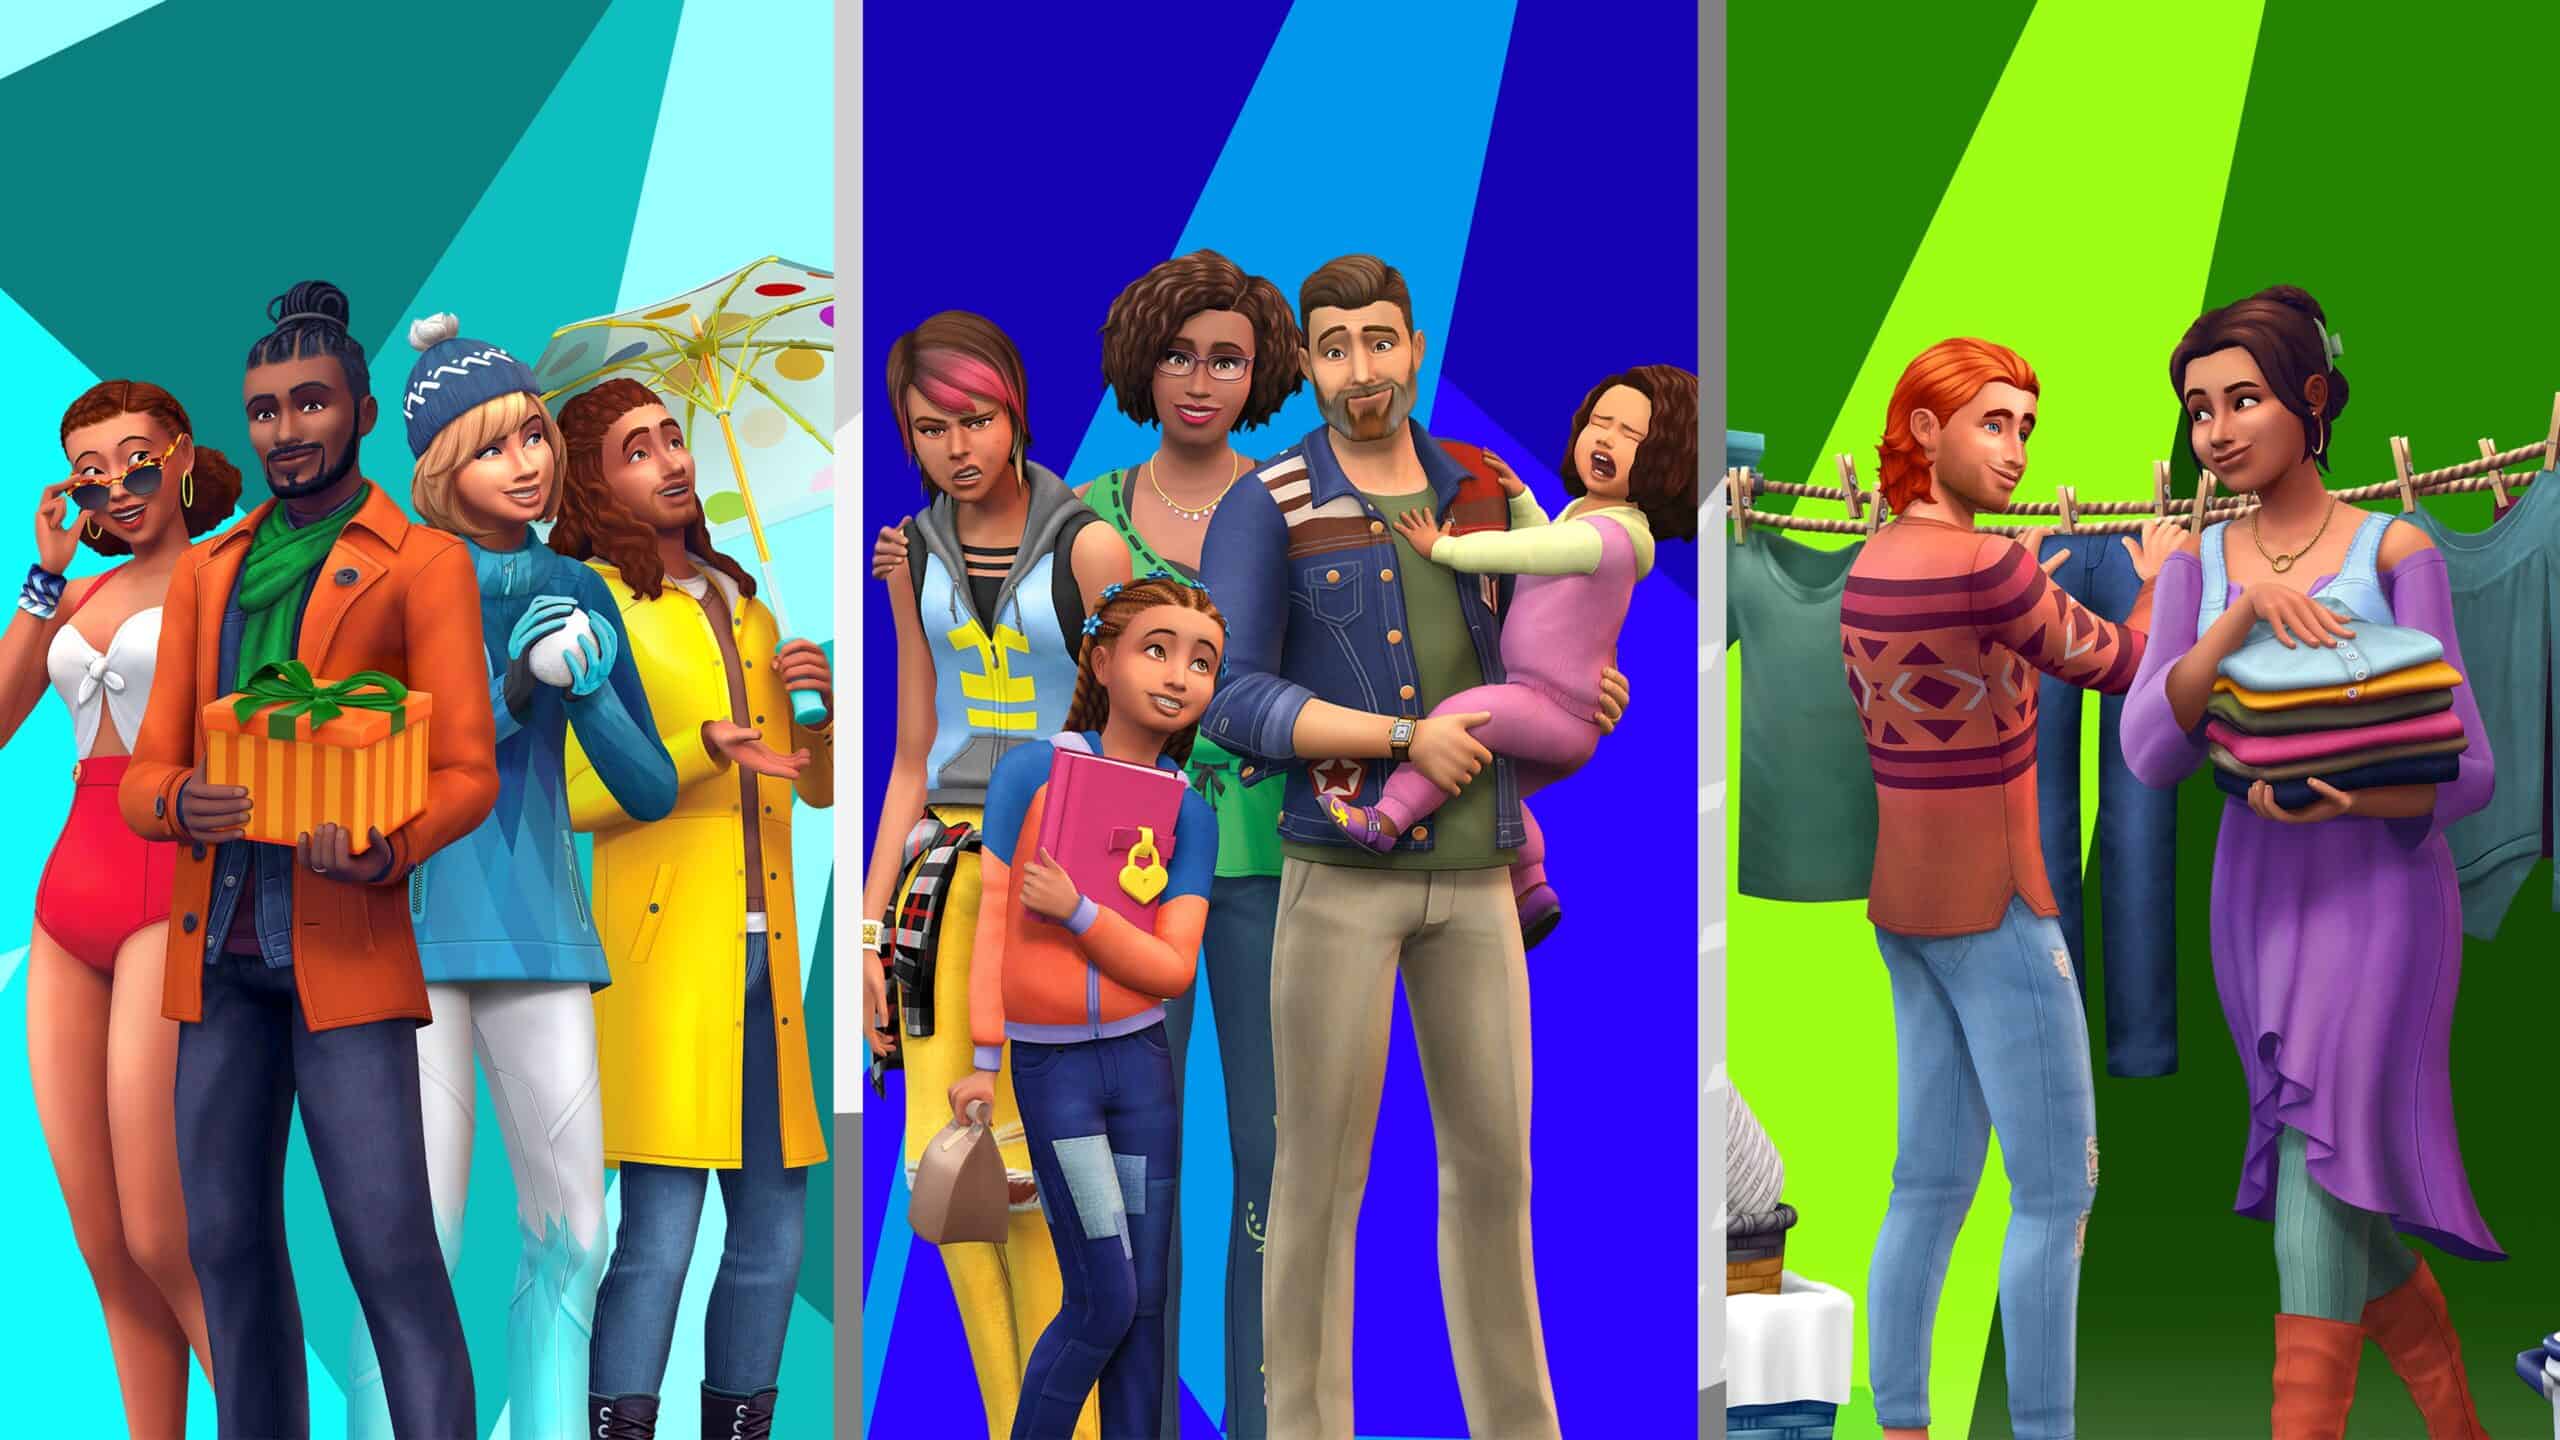 The Sims 4: Everyday Sims Bundle